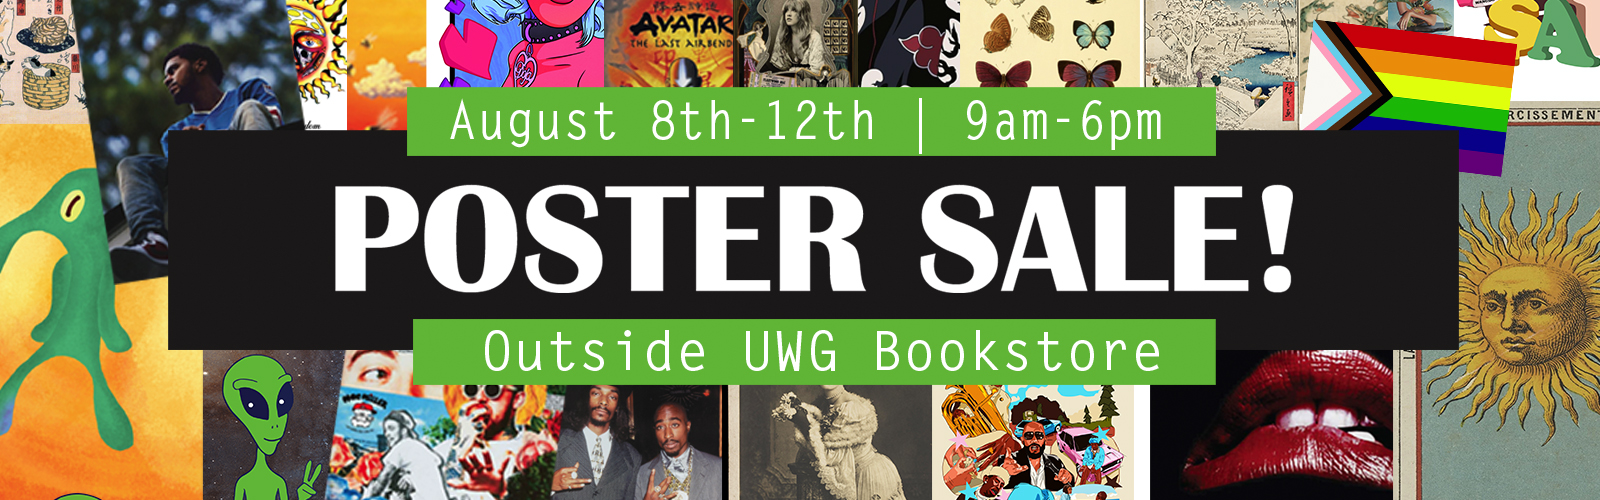 Poster Sale at the UWG Bookstore from August 8-10th from 9am - 6pm.